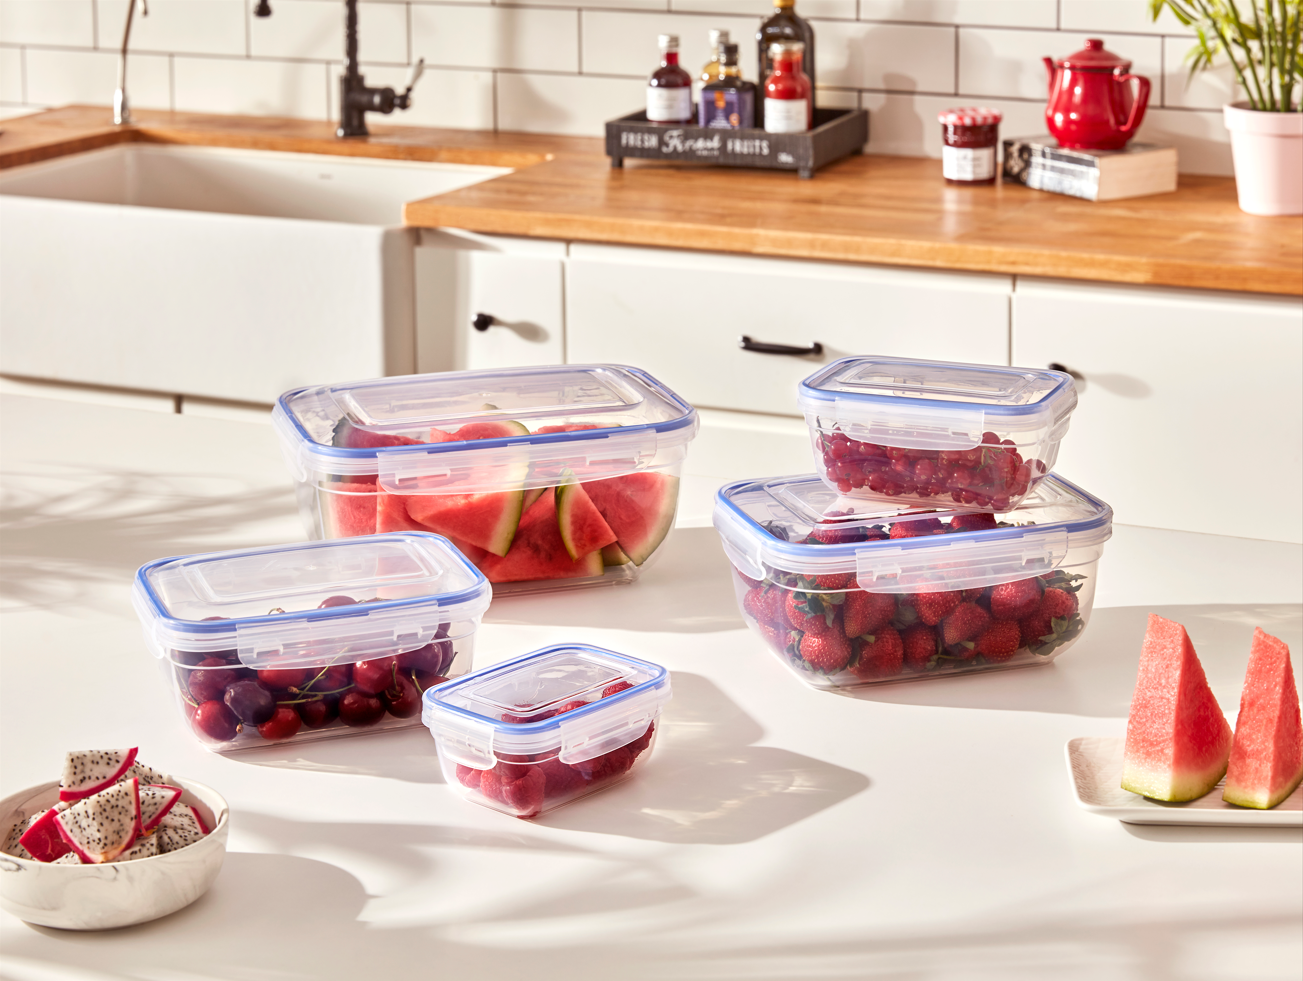 Superio Food Storage Containers, Airtight Leak-Proof Meal Prep Deep Rectangular Containers, Set of 3 Multiple sizes.